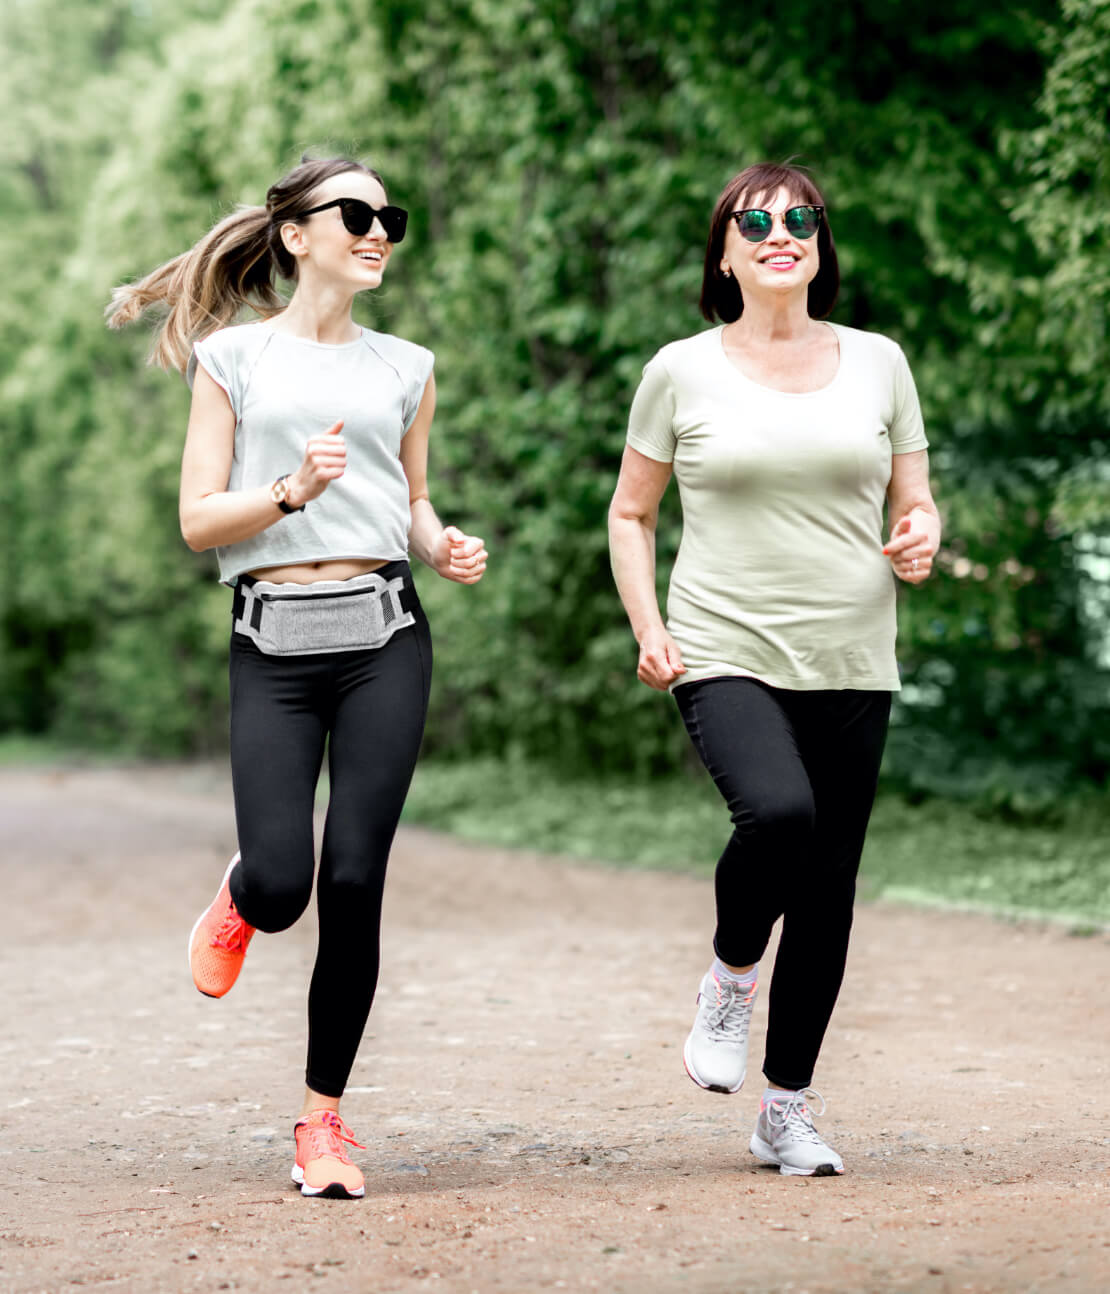 Two women out for a jog.